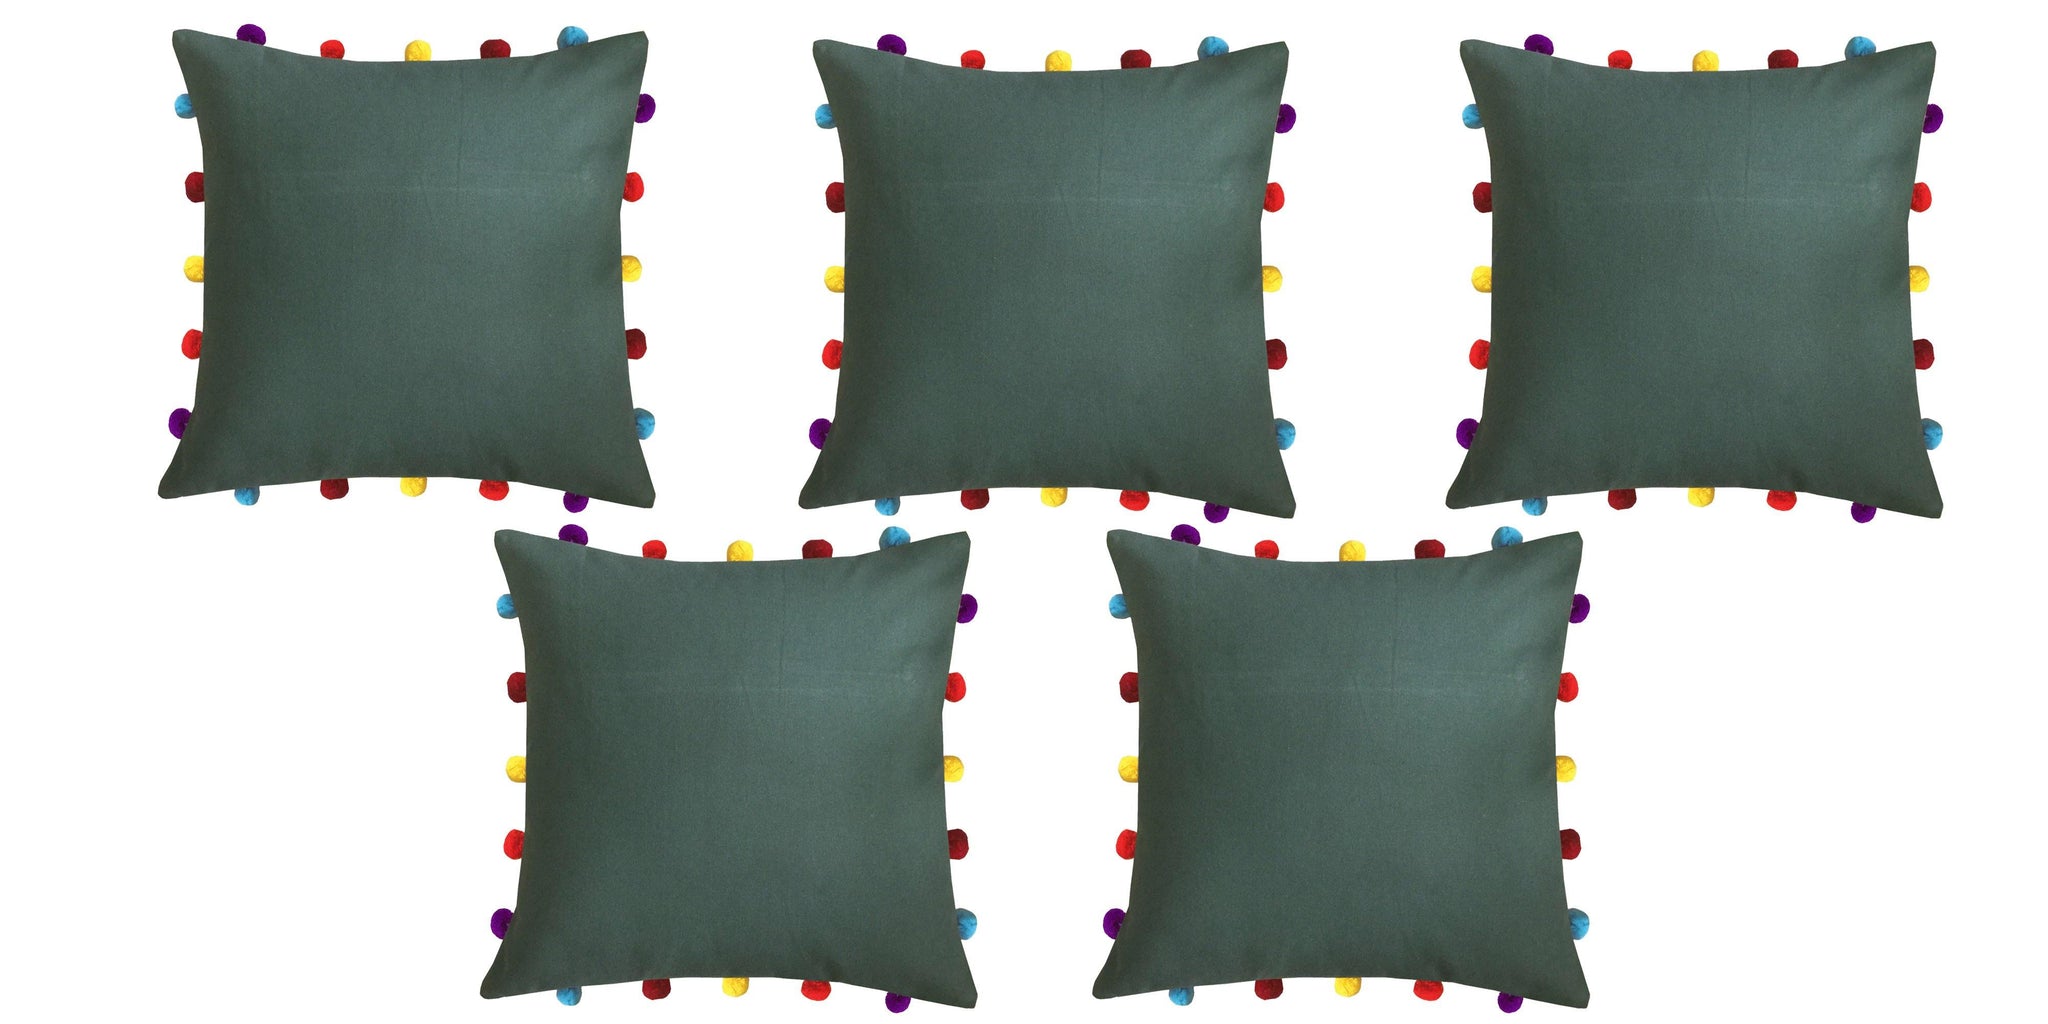 Lushomes Vineyard Green Cushion Cover with Colorful pom poms (5 pcs, 16 x 16”) - Lushomes